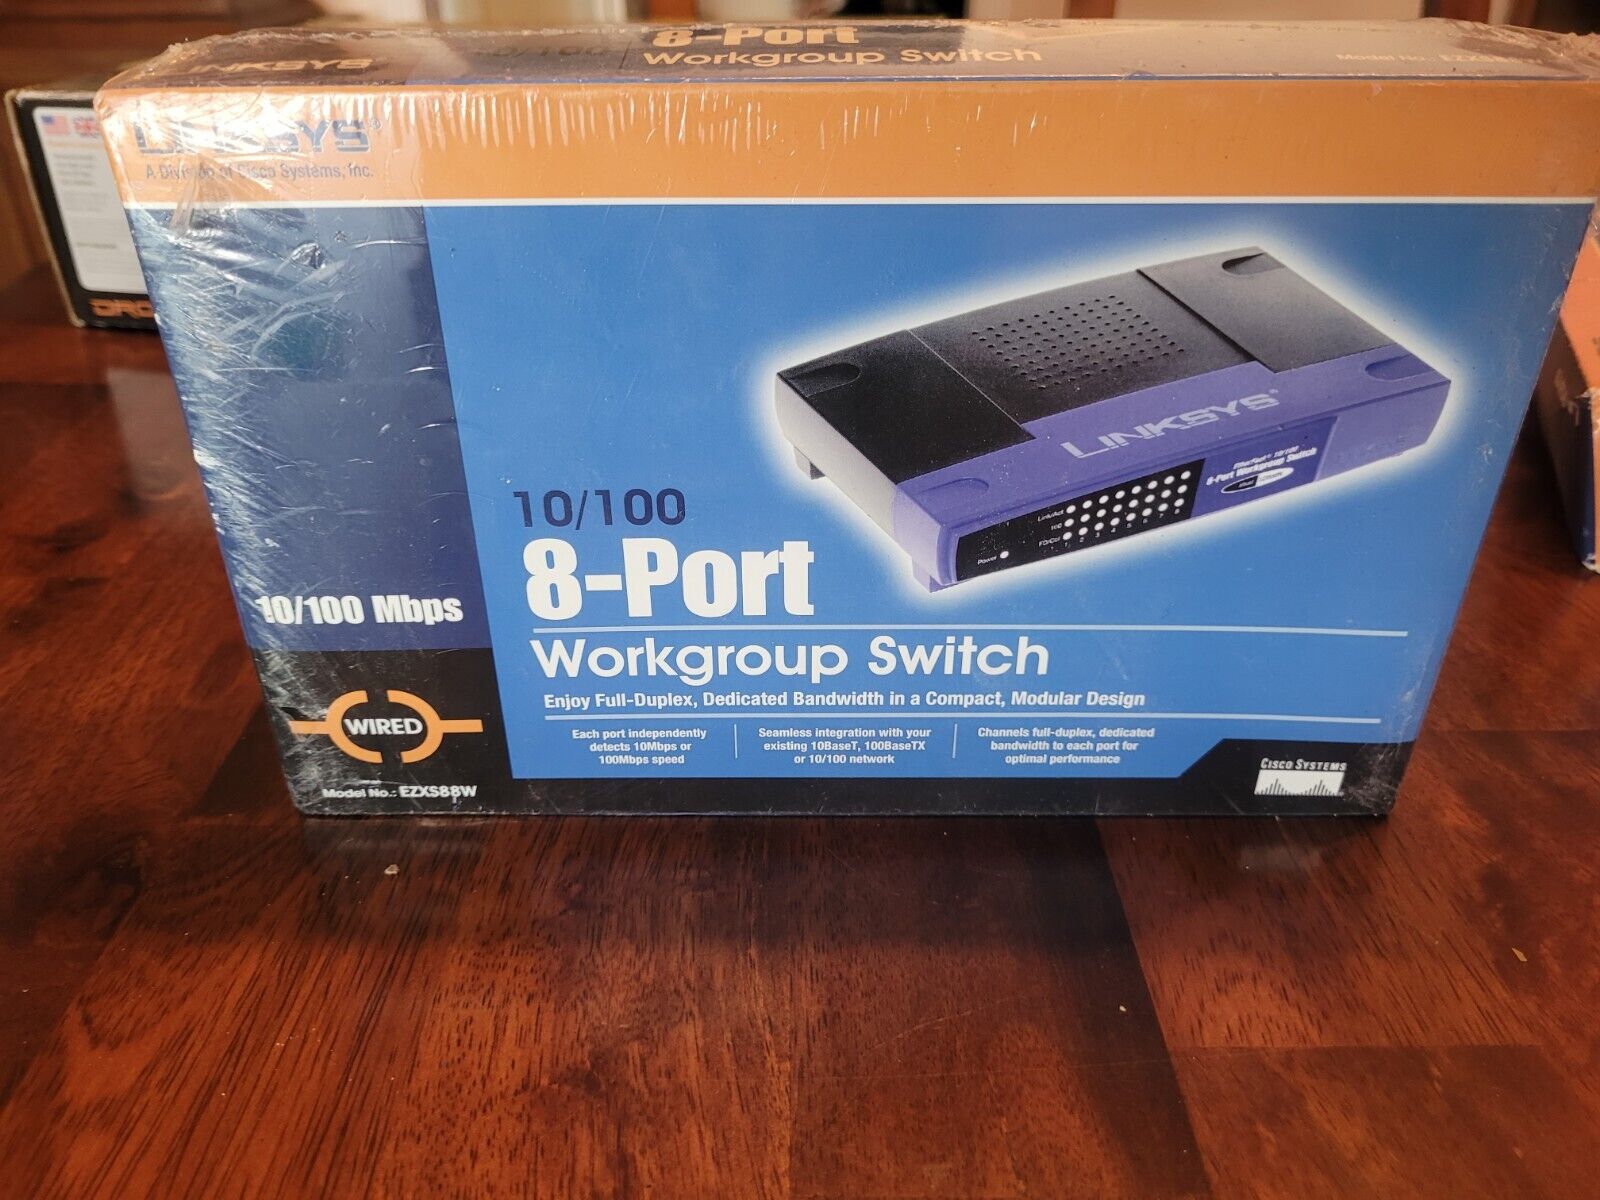 LINKSYS 10/100 8 PORT WORKGROUP SWITCH Open Box